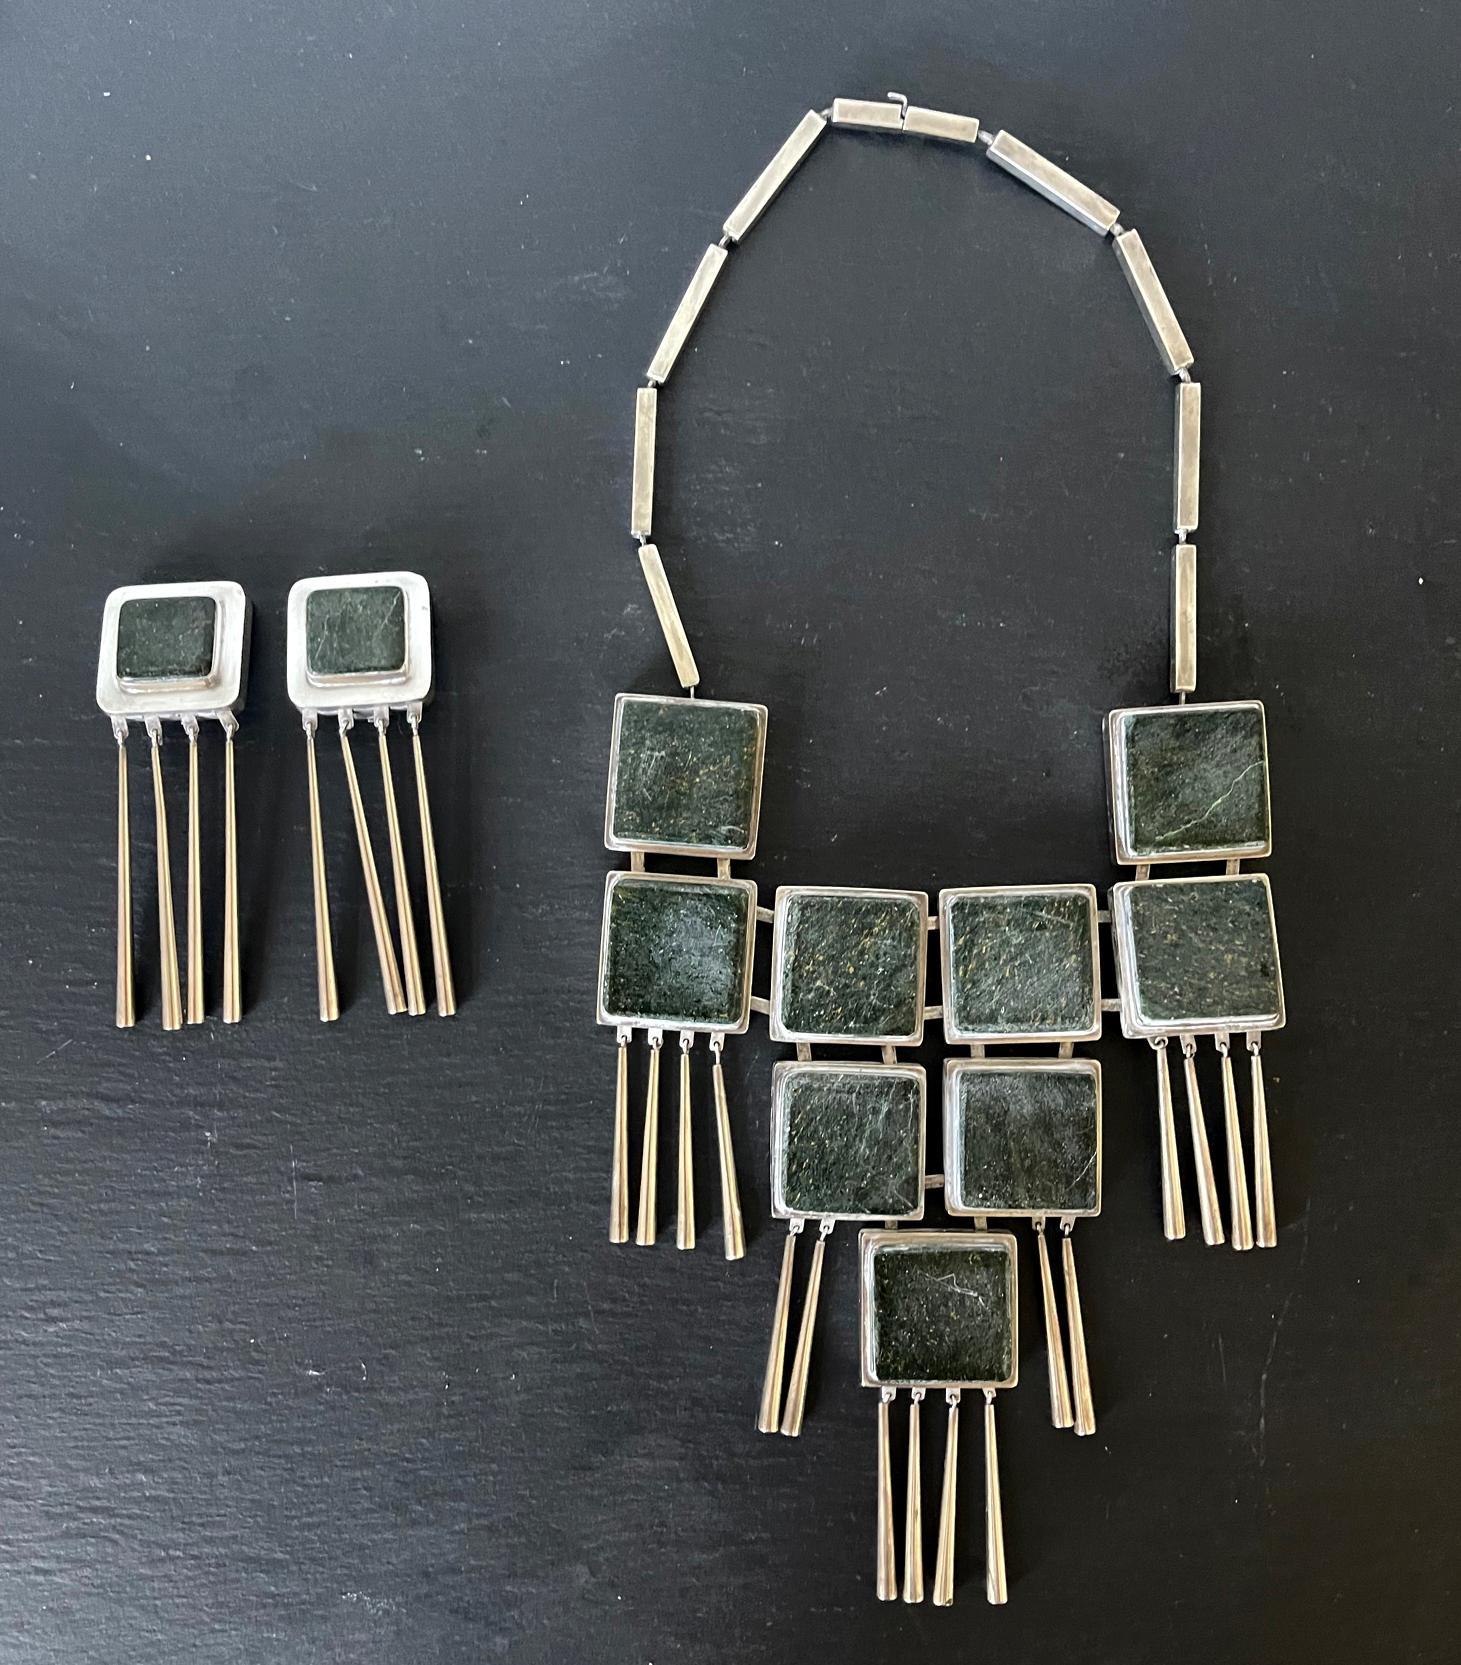 A bespoken jewelry set including a necklace and a pair of clip-on earrings crafted by Graziella Laffi, Lima, Peru, circa 1970. The suite features linked square of green hardstone (appears to be a jade color granite or marble) set in the sterling